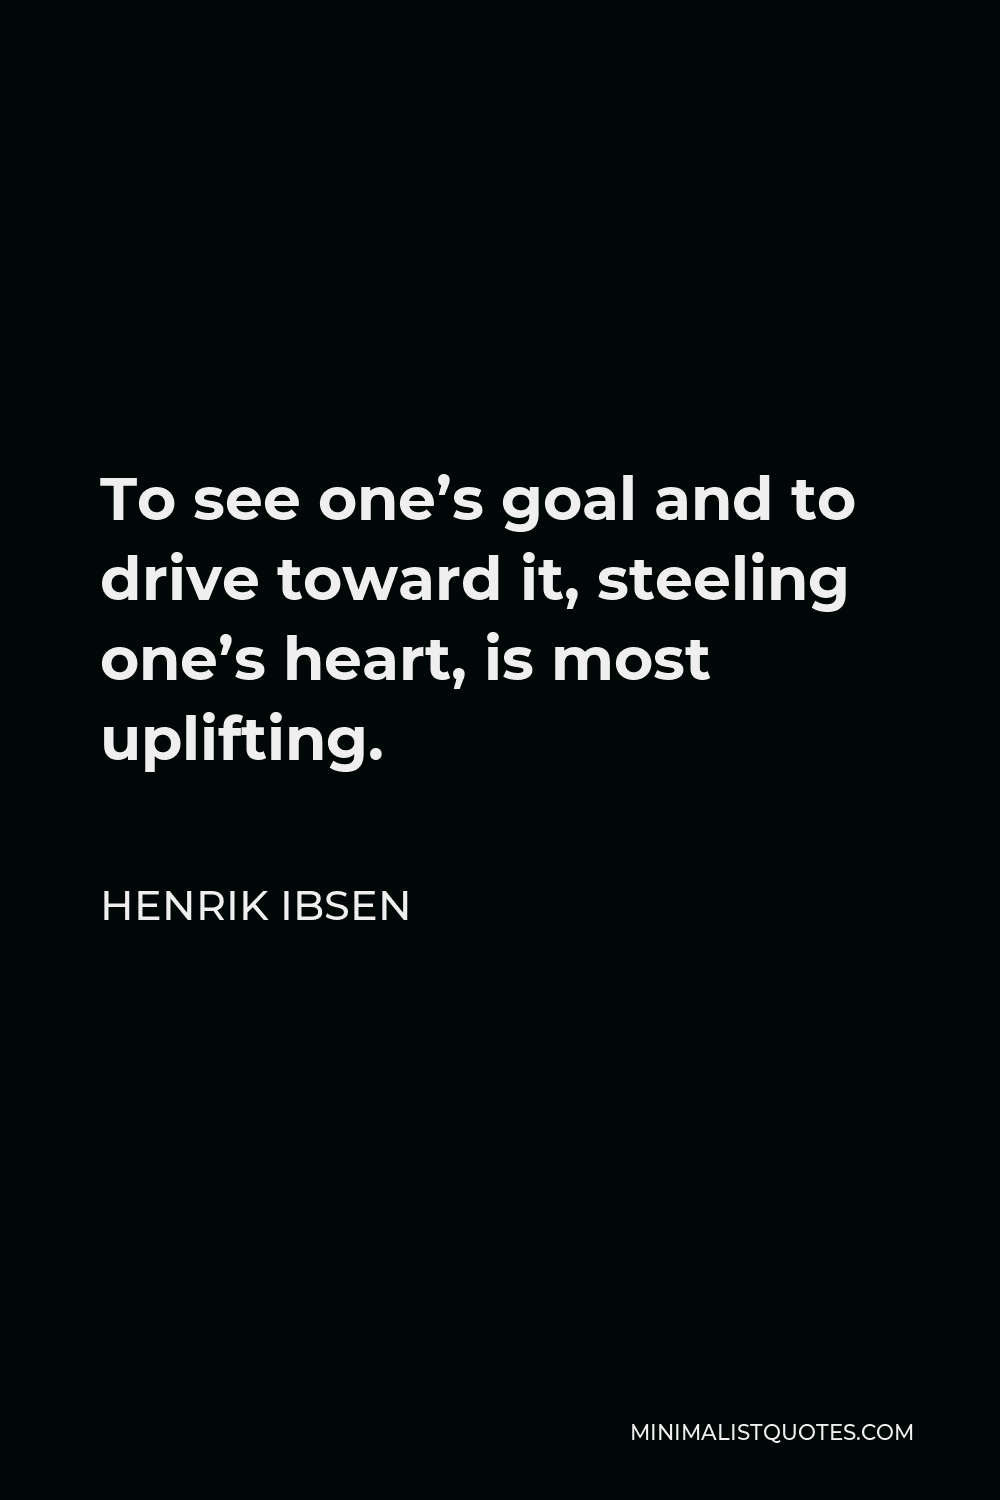 Henrik Ibsen Quote - To see one’s goal and to drive toward it, steeling one’s heart, is most uplifting.